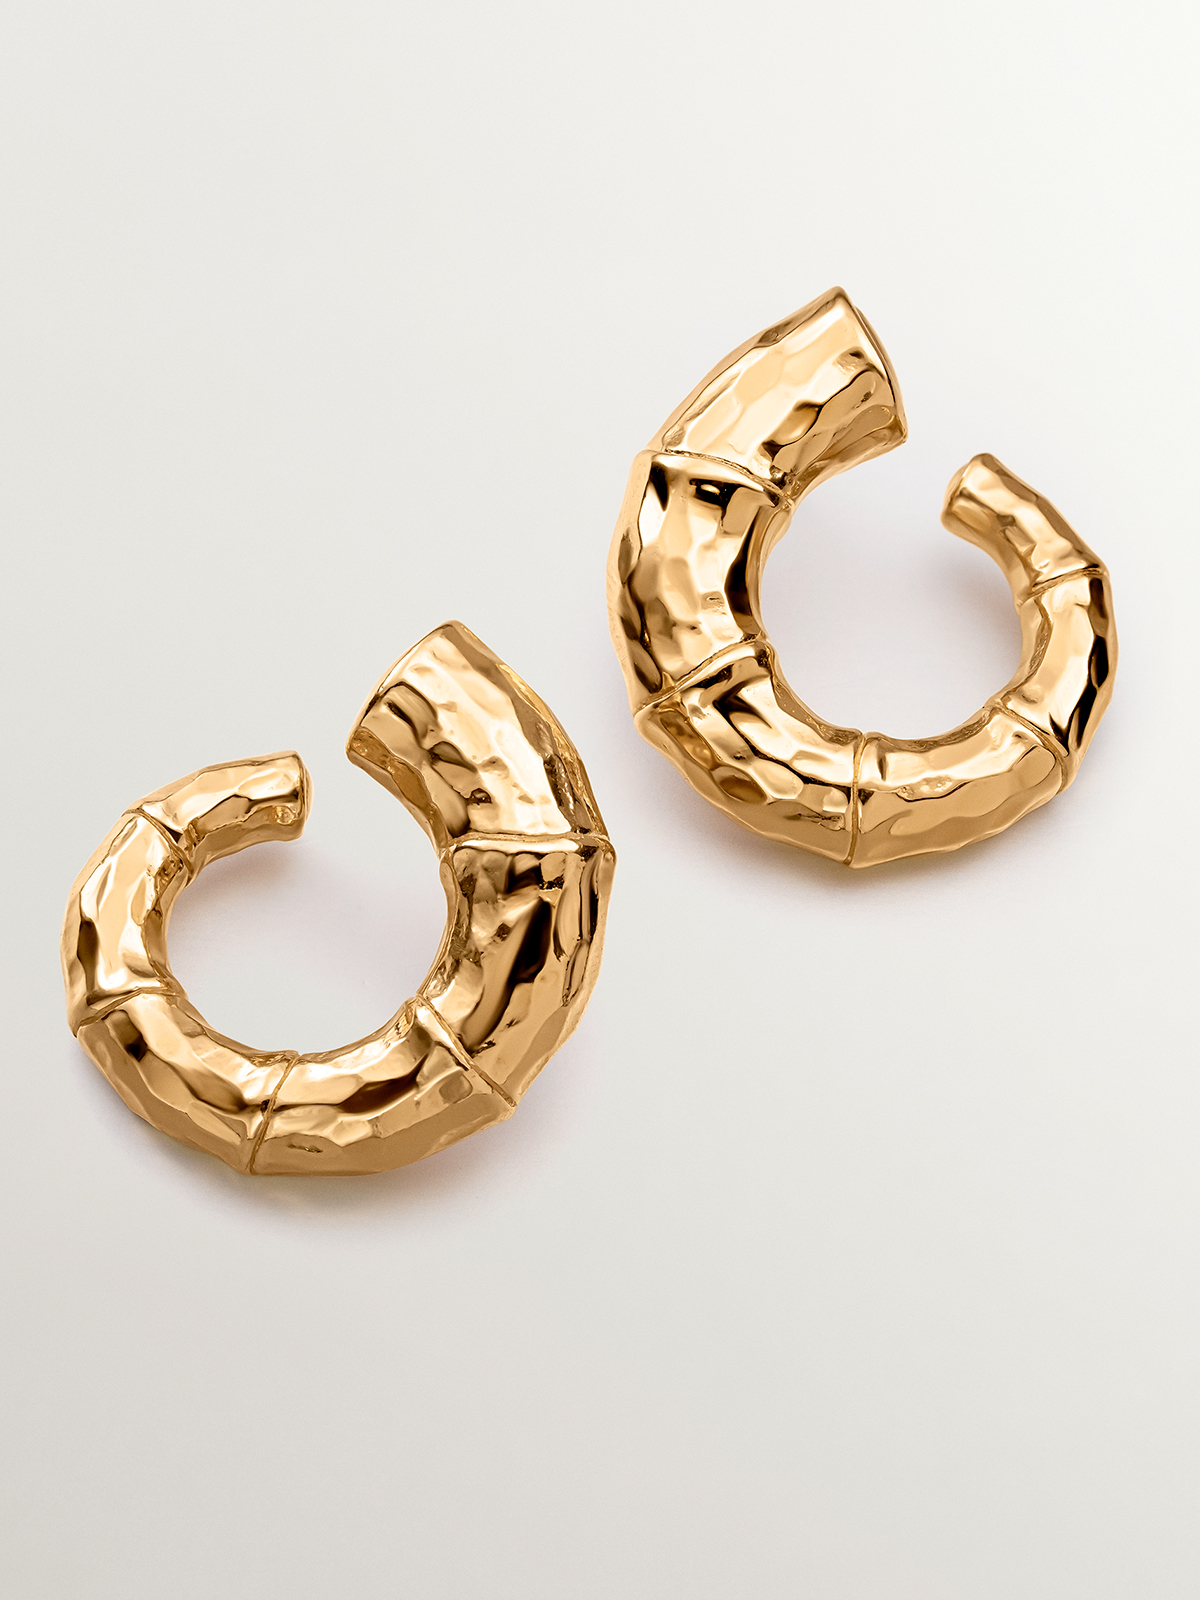 Large hoop earrings made of 925 silver, bathed in 18K yellow gold with a bamboo texture.